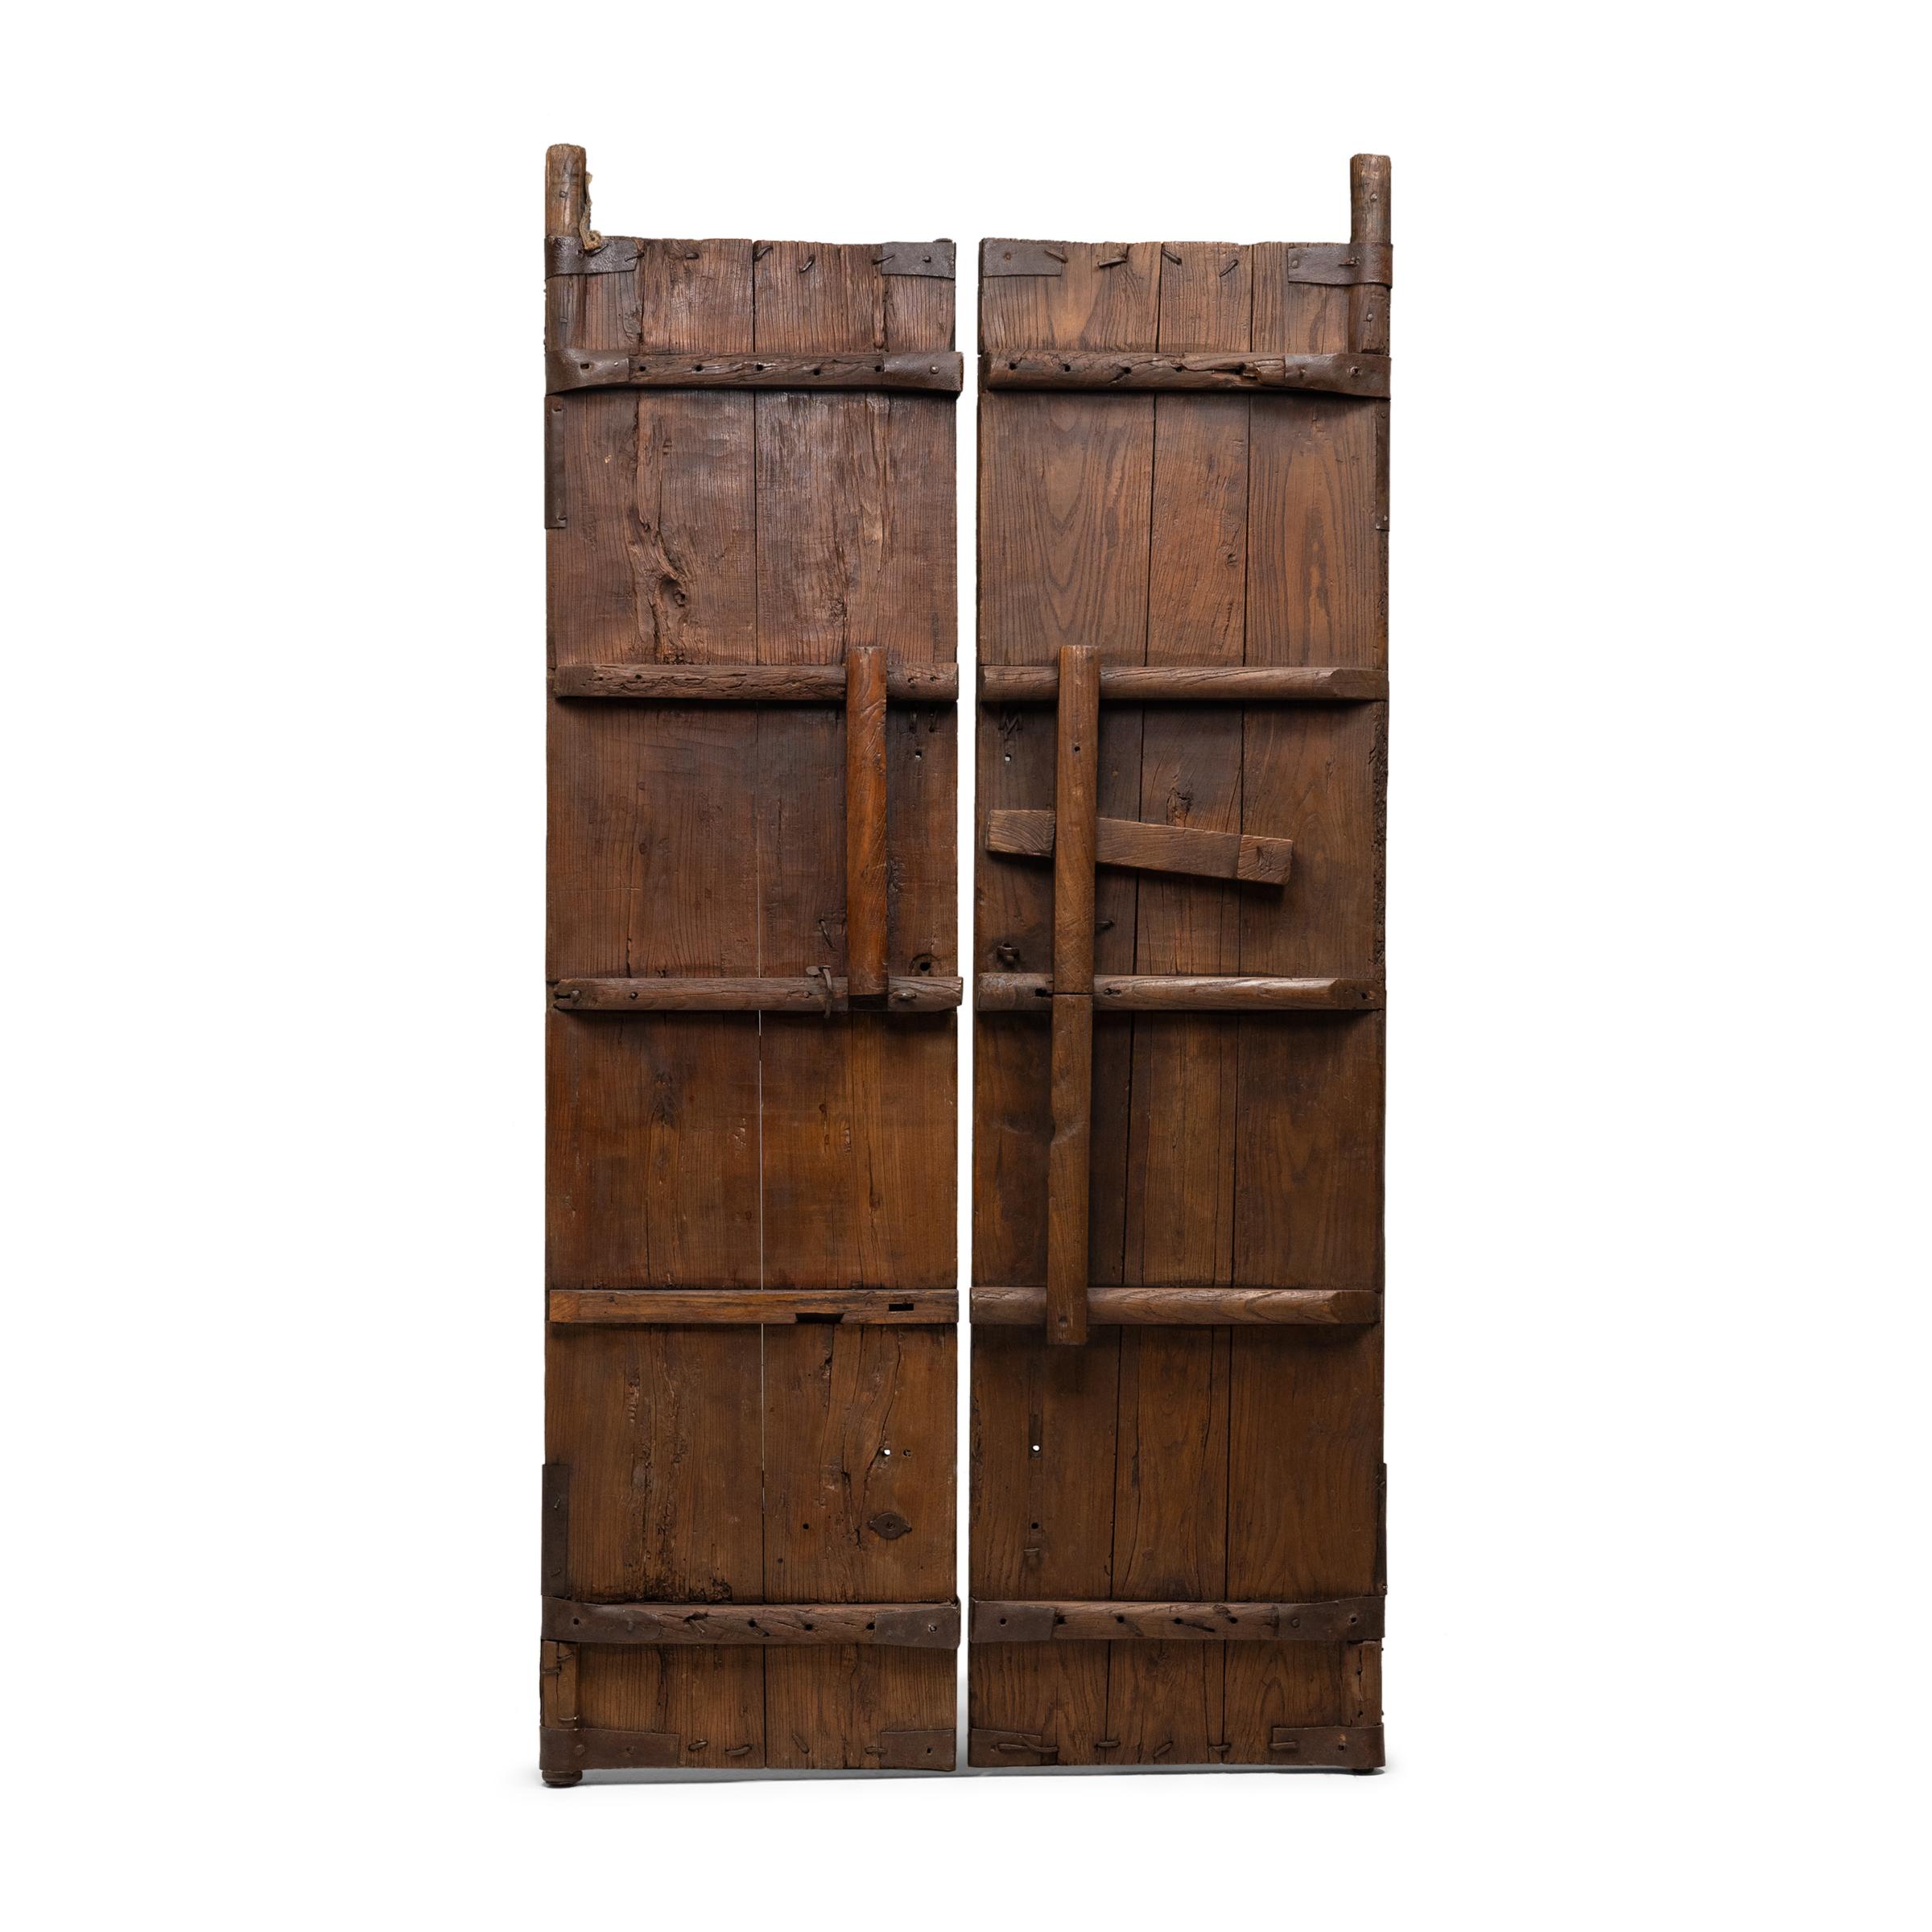 Pair of Chinese Iron Bound Courtyard Doors, c. 1850 For Sale 1